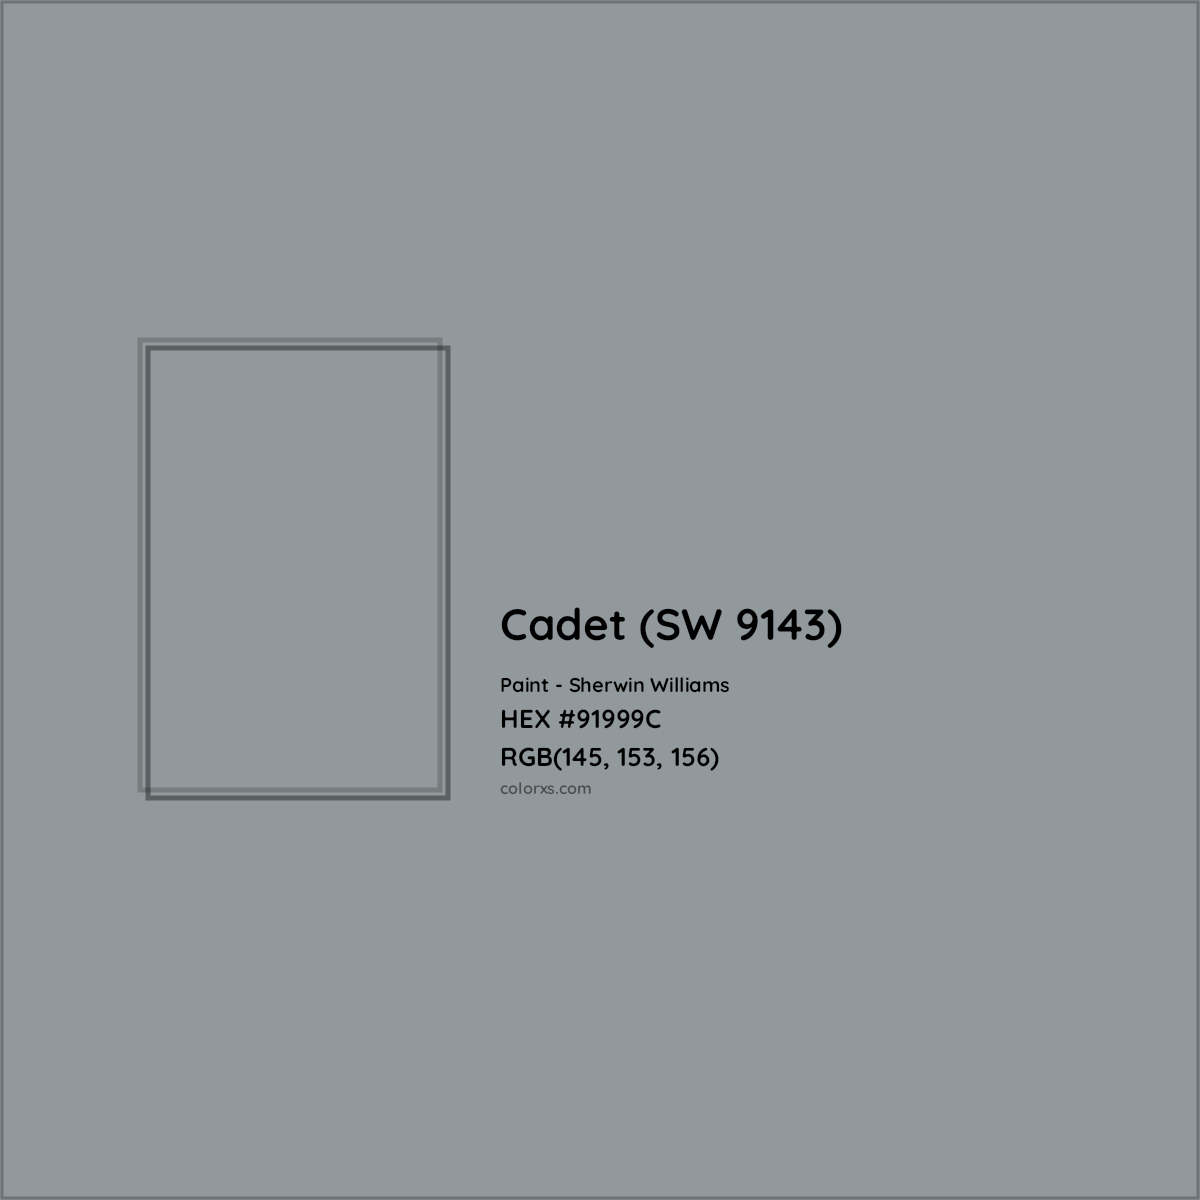 HEX #91999C Cadet (SW 9143) Paint Sherwin Williams - Color Code